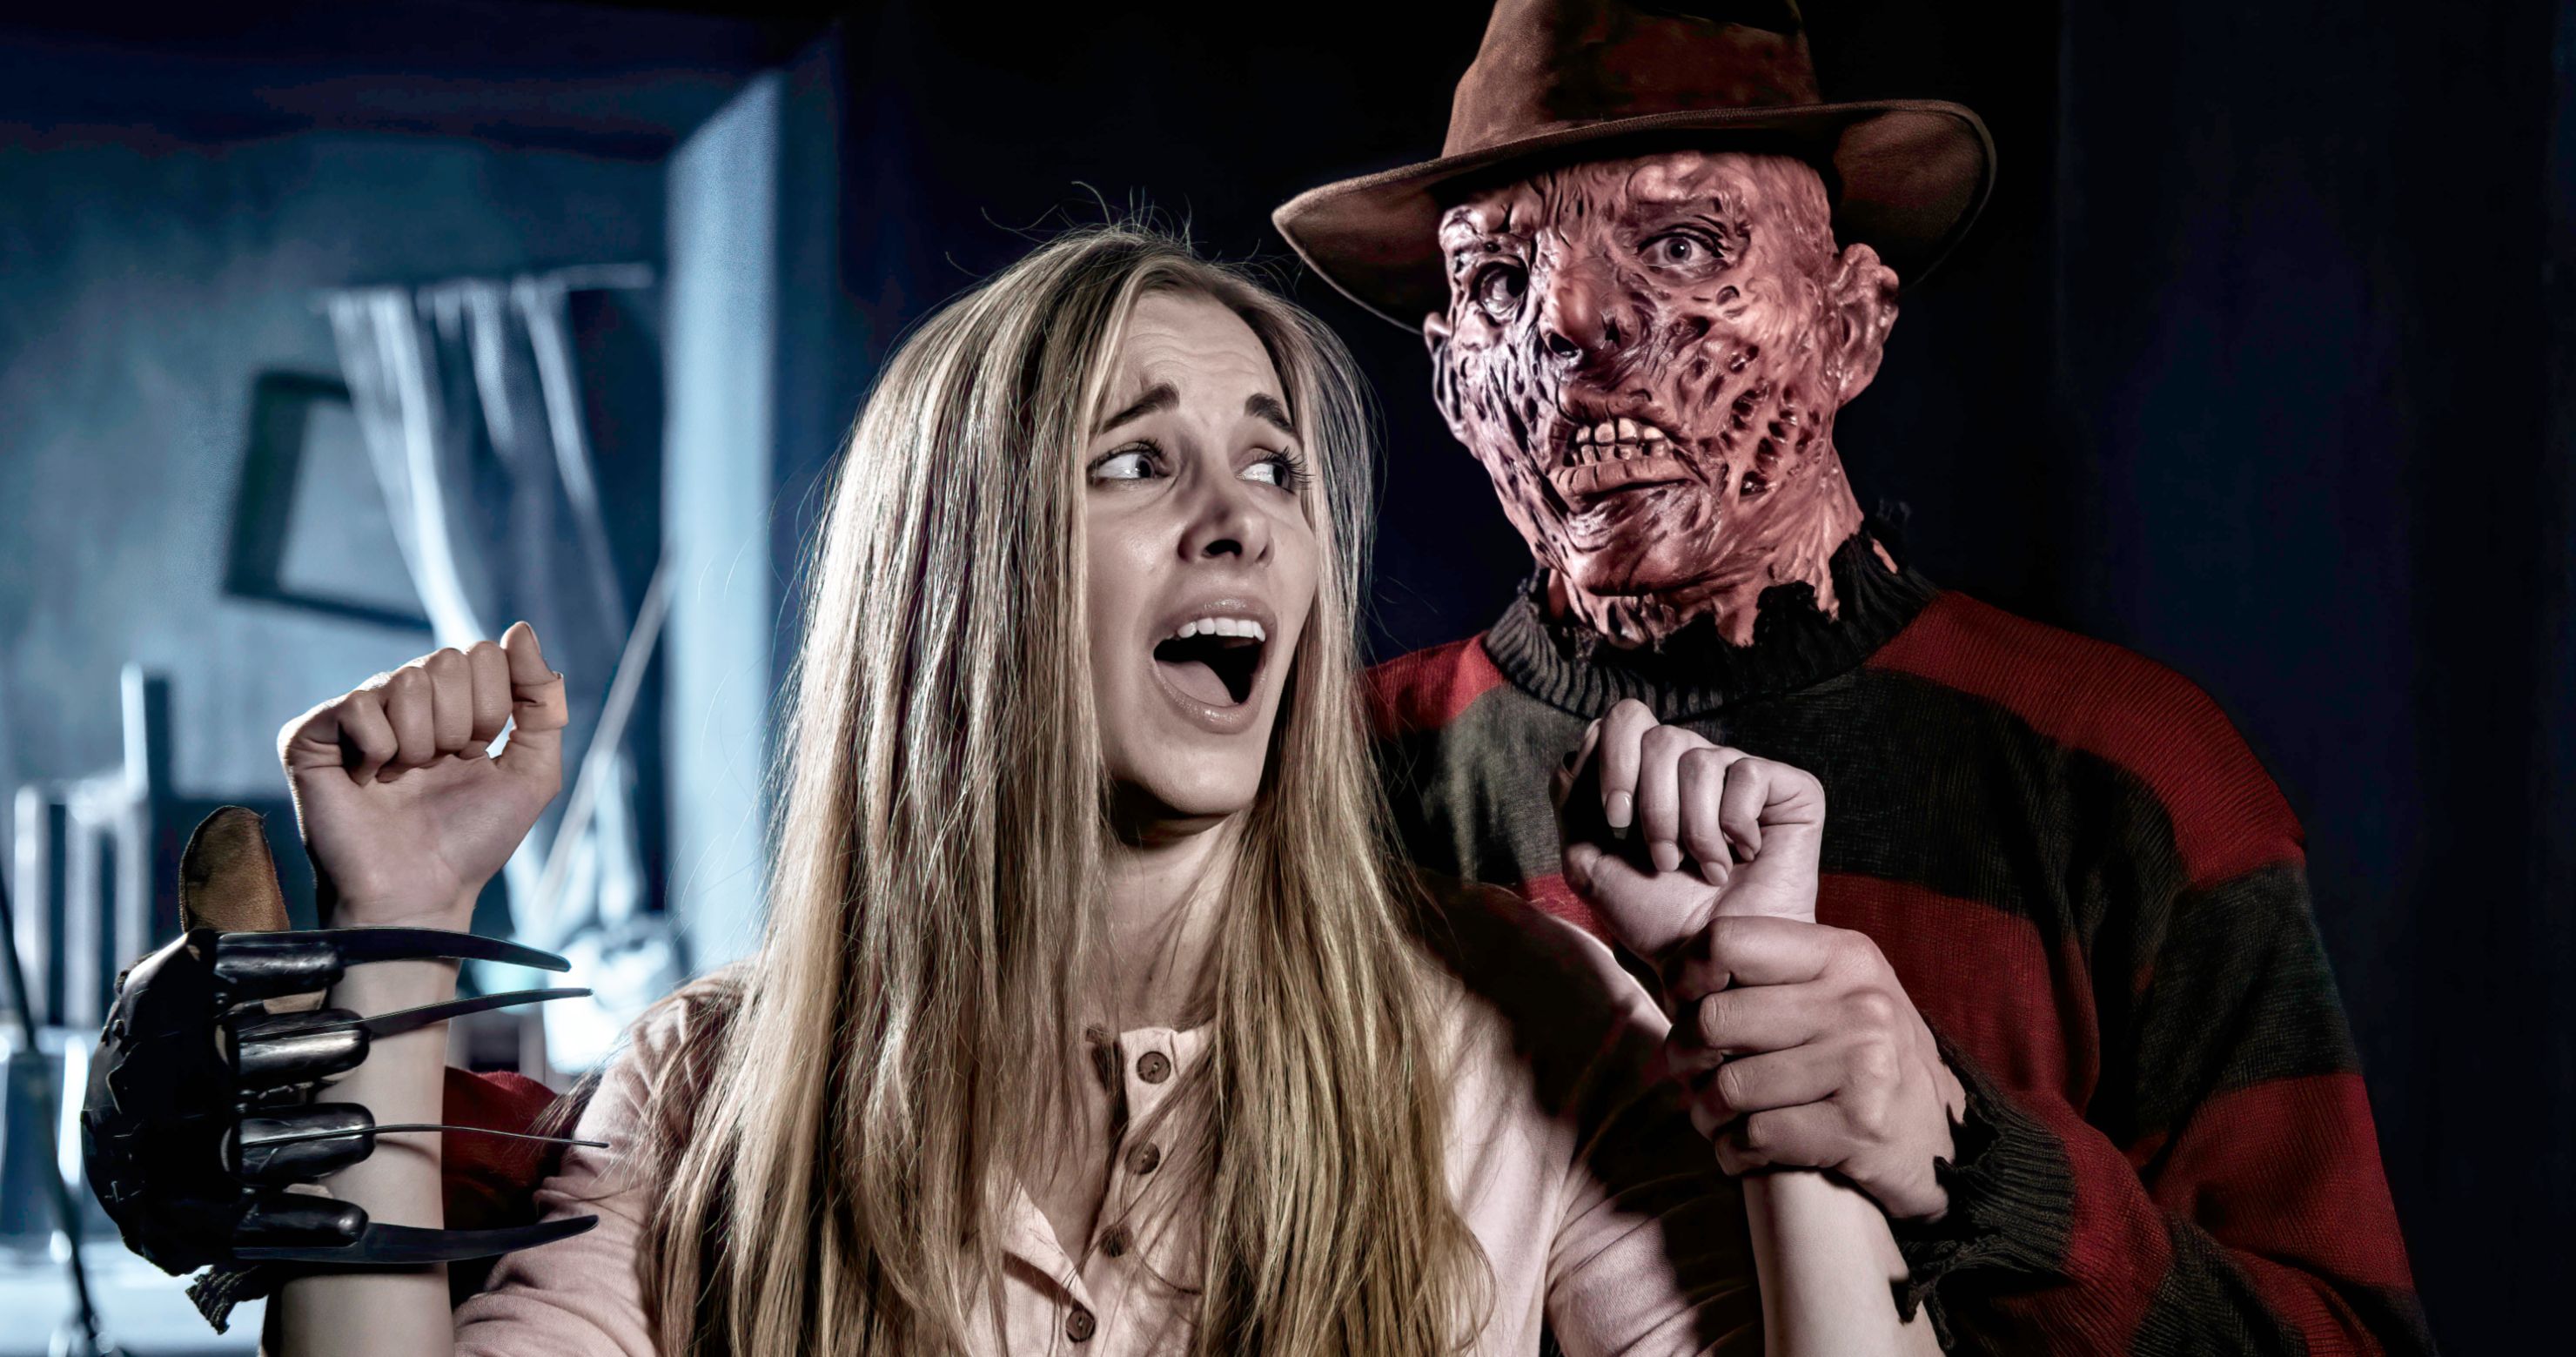 Freddy's back in needless `Elm Street' remake - The San Diego